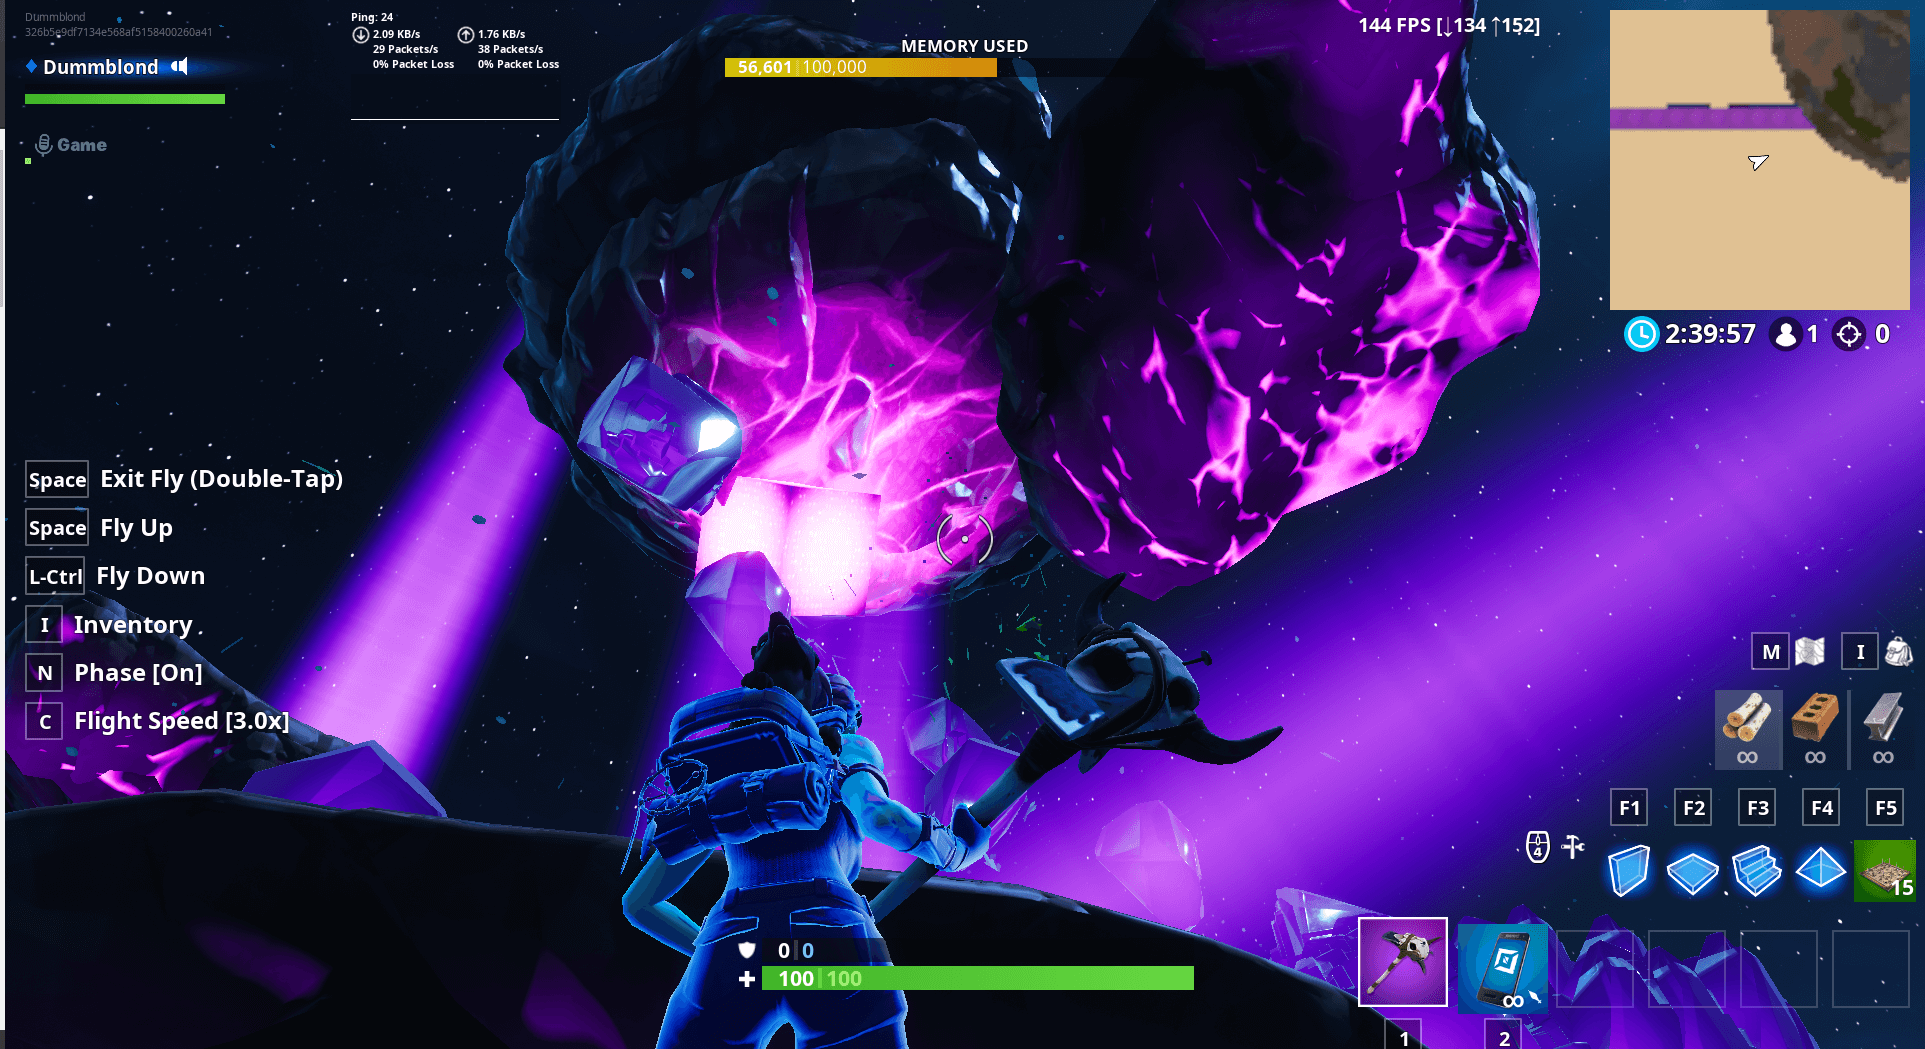 KEVIN TOOK OVER MY DEATH RUN